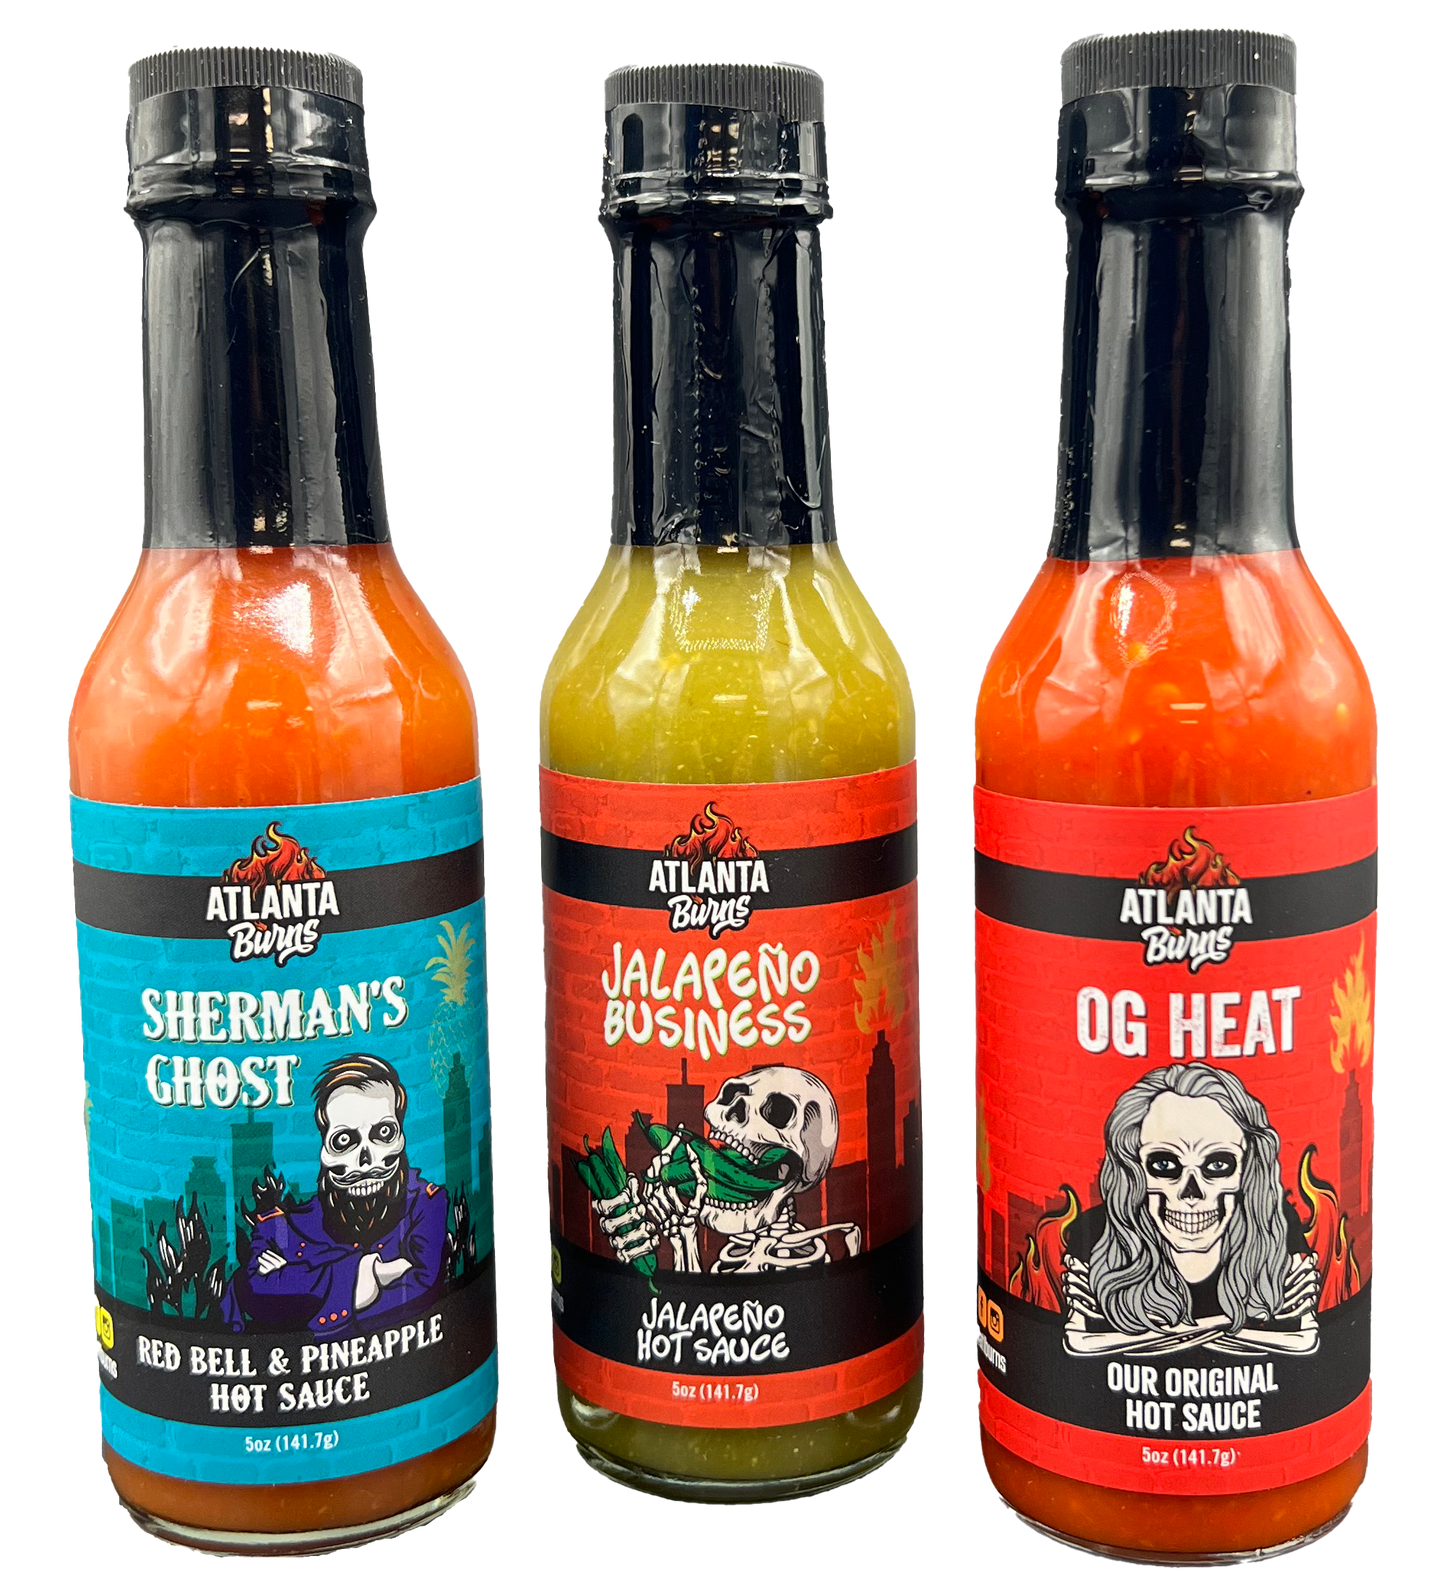 Explore the 'OG Three' hot sauce pack by Atlanta Burns, featuring our signature OG Heat, Jalapeño Business, and Sherman's Ghost sauces, perfect for adding a flavorful kick of Atlanta’s best to your meals.